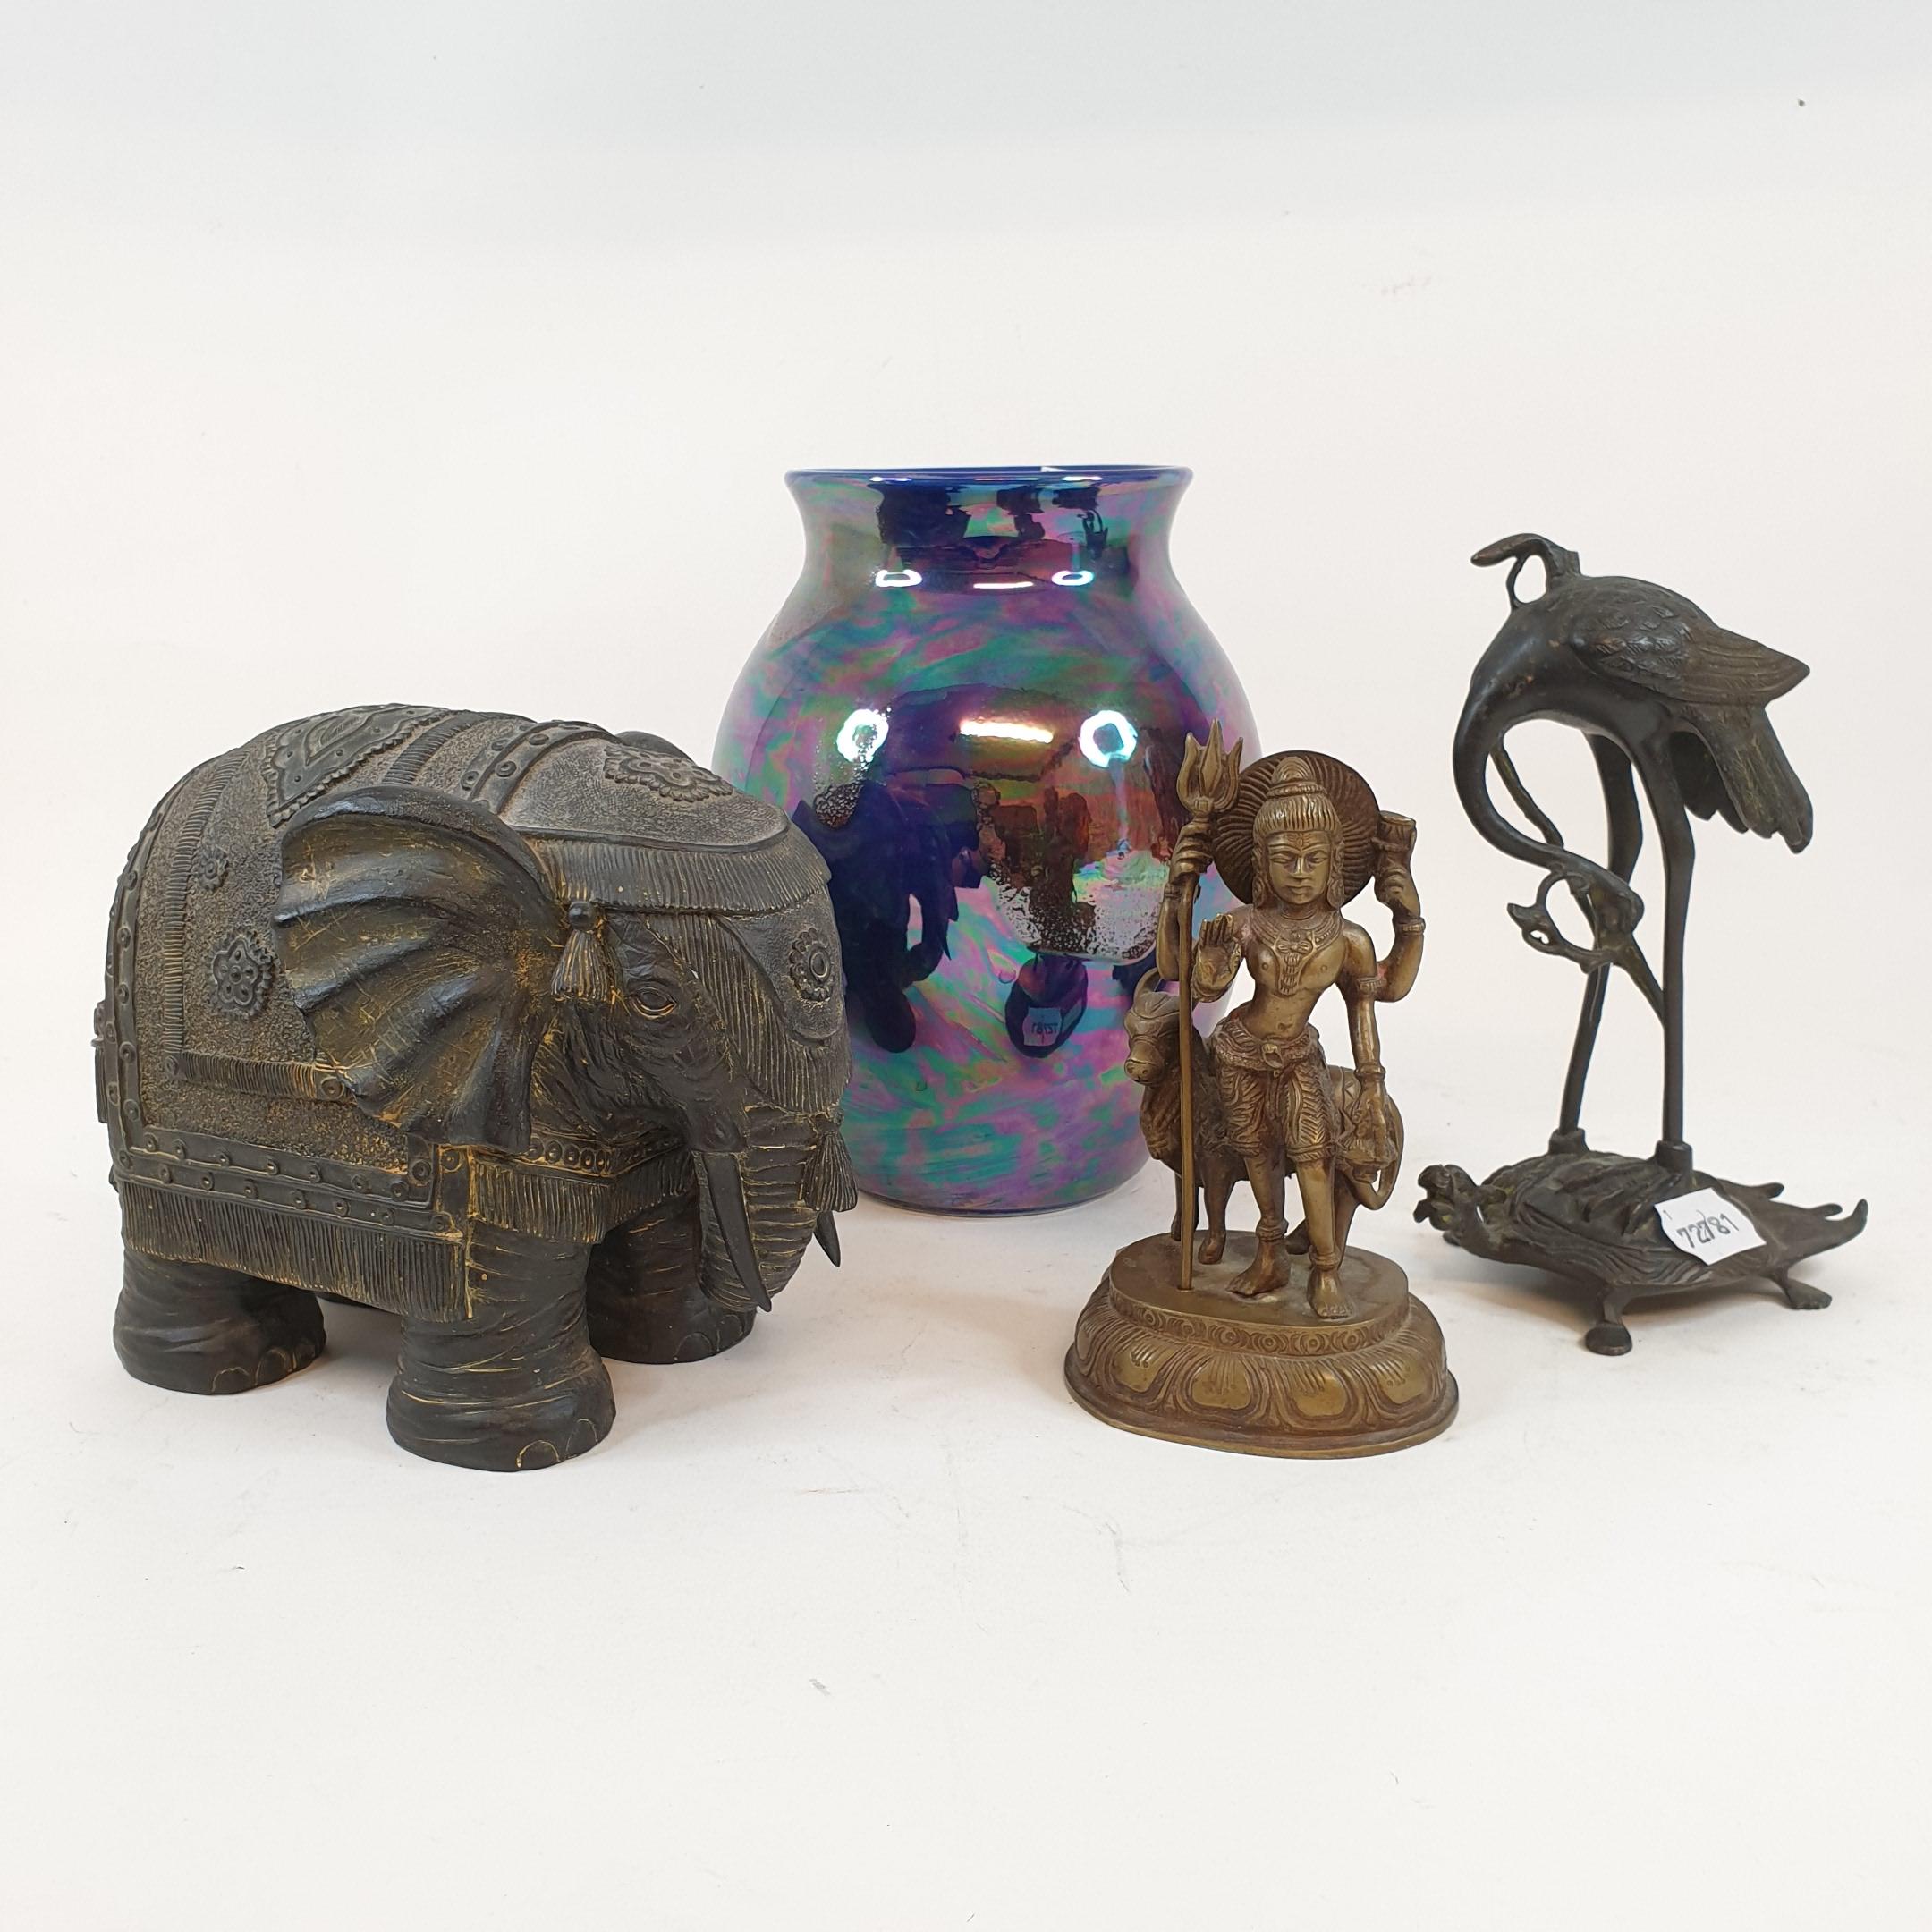 Assorted Indian textiles, a Japanese bronze crane on a turtle, incomplete, a Poole Pottery vase, and